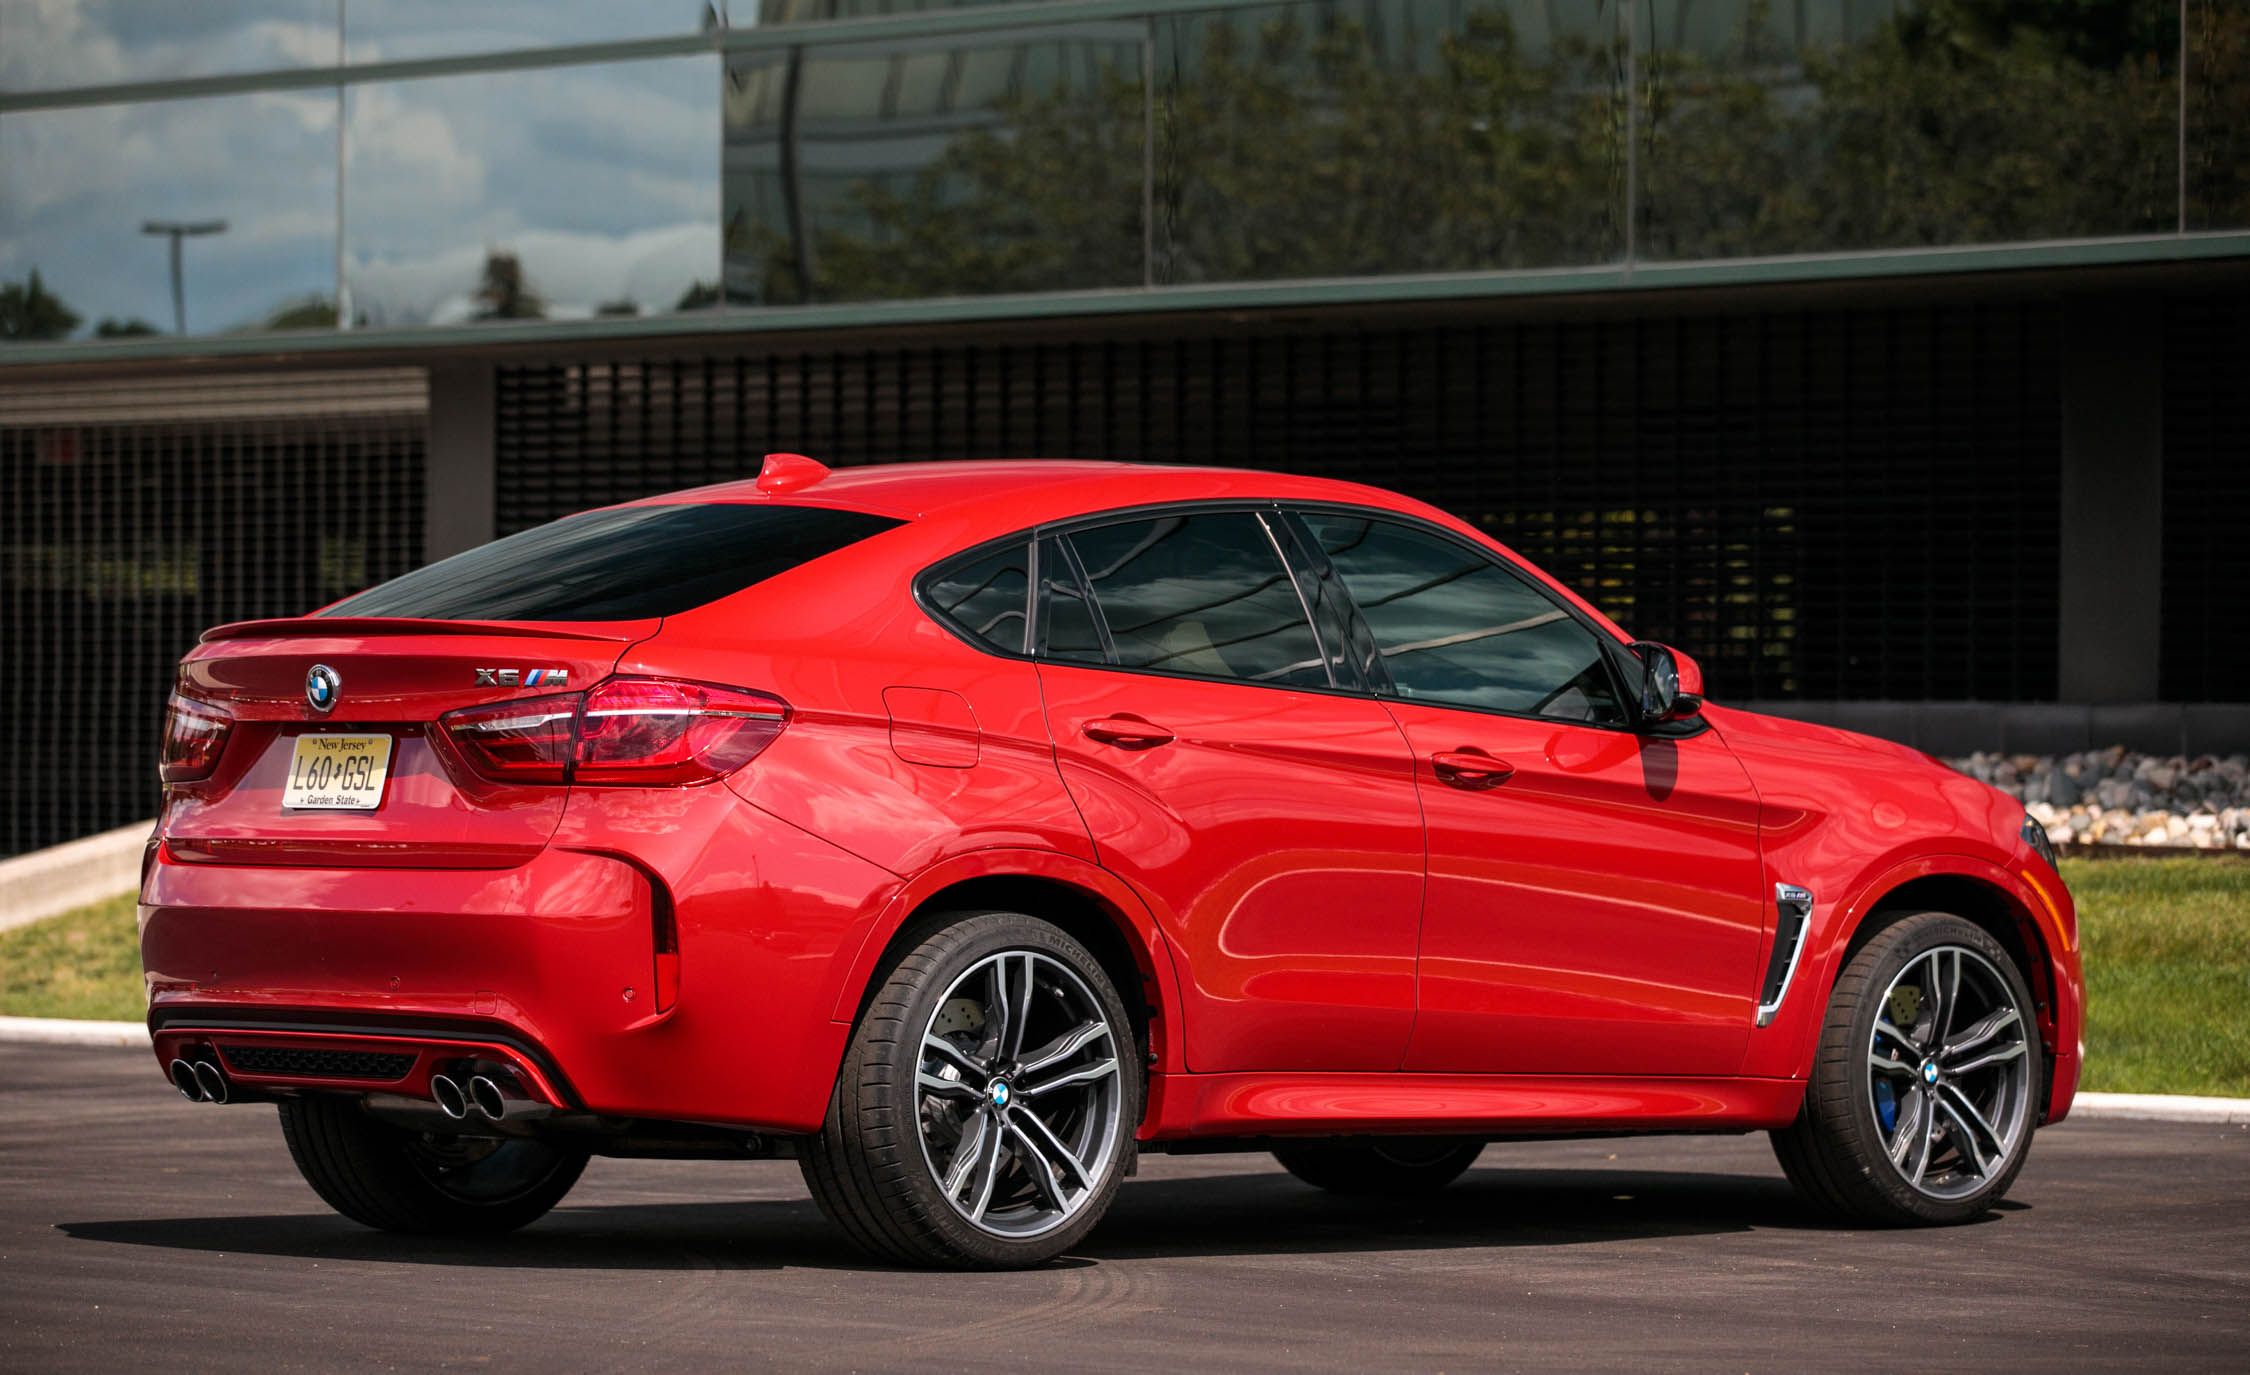 Тема x6. BMW x6 m 2017. BMW x6m 2018. БМВ x6 m 2017. BMW x6m f86 Red.